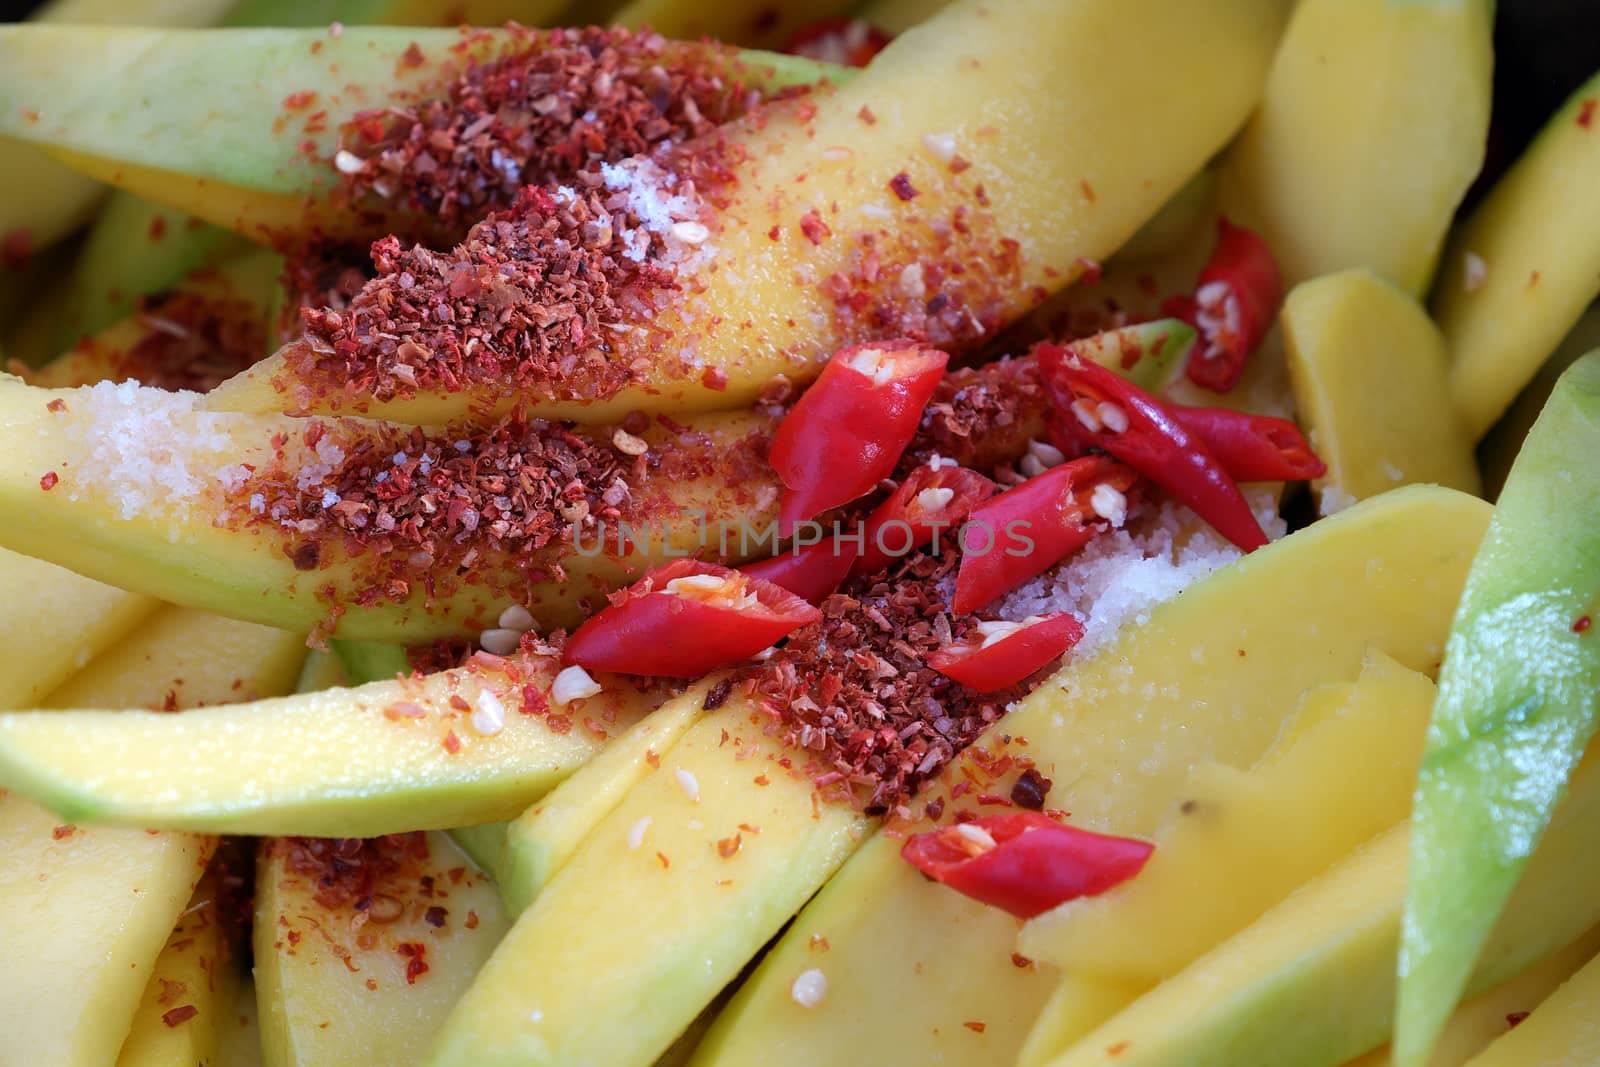 Vietnamese fruit, green mango cut in slice, a popular tropical fruit, rich vitamin A, vitamin C, collagen, good for health and impulse calcium absorption